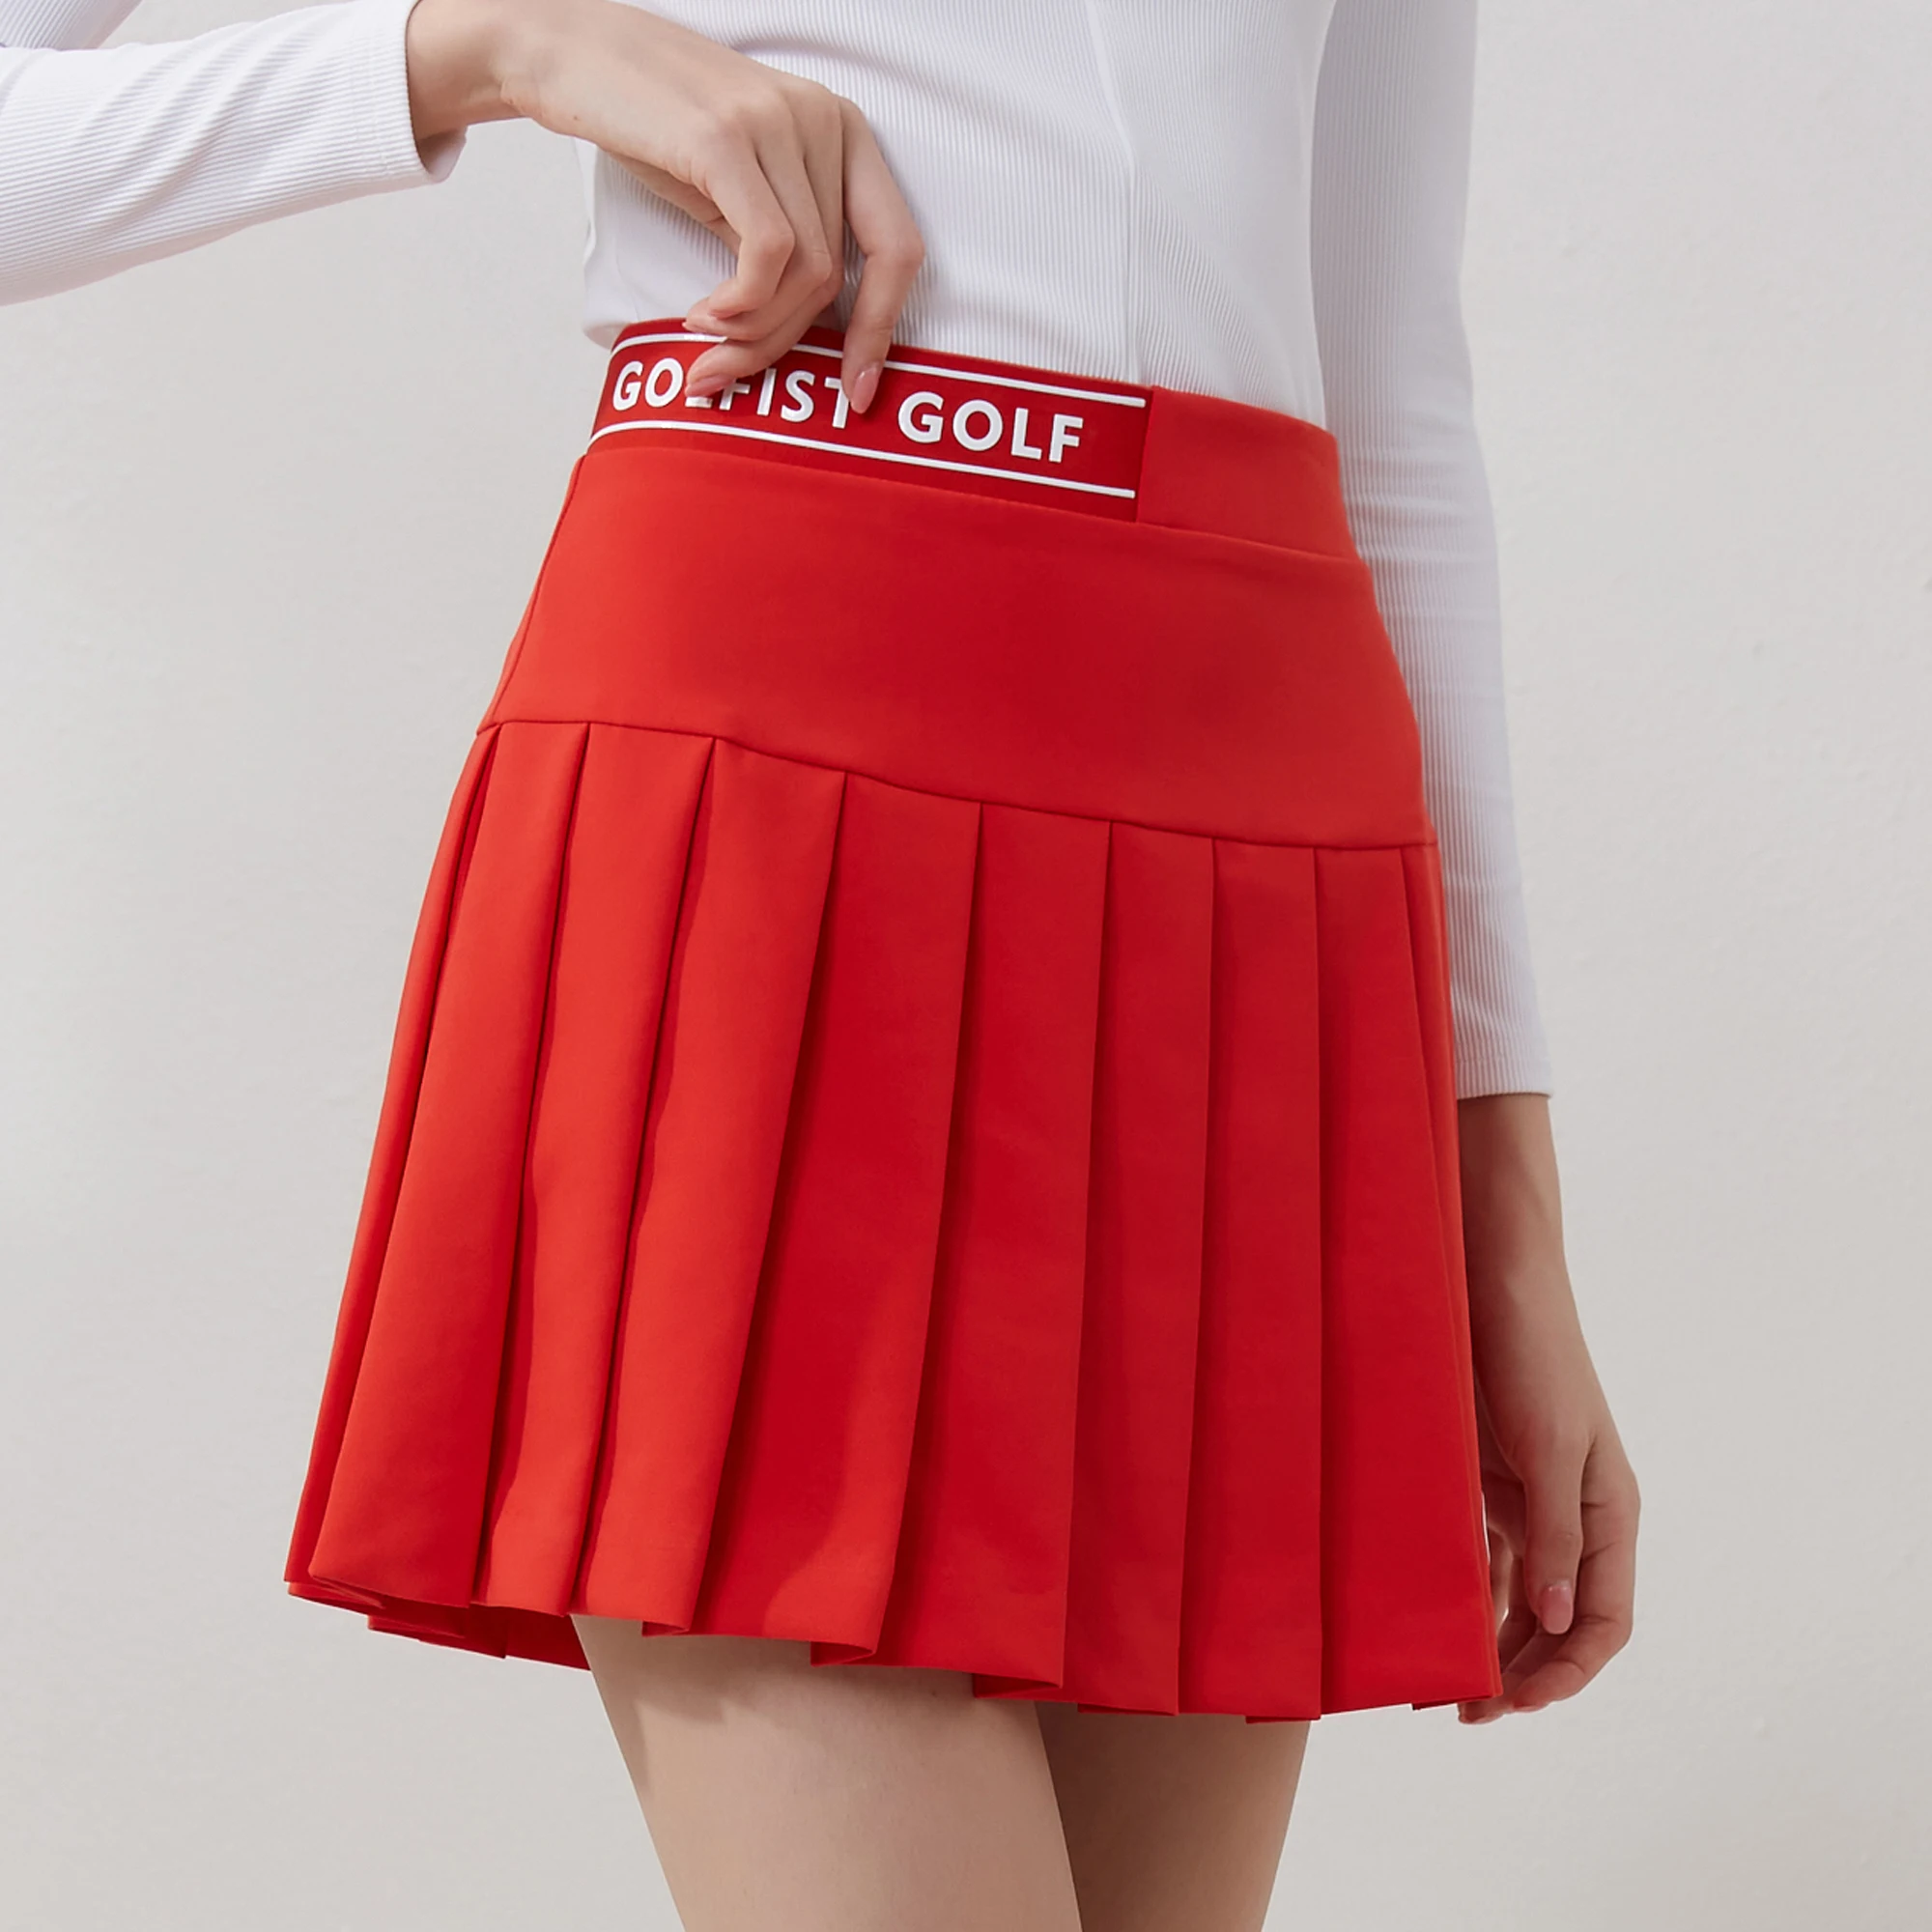 Golfist Golf Autumn and Spring Women Skirt Elastic Causal Sports Pleated Short Skirts With Pants inside Ladies Golf Tennis Wear